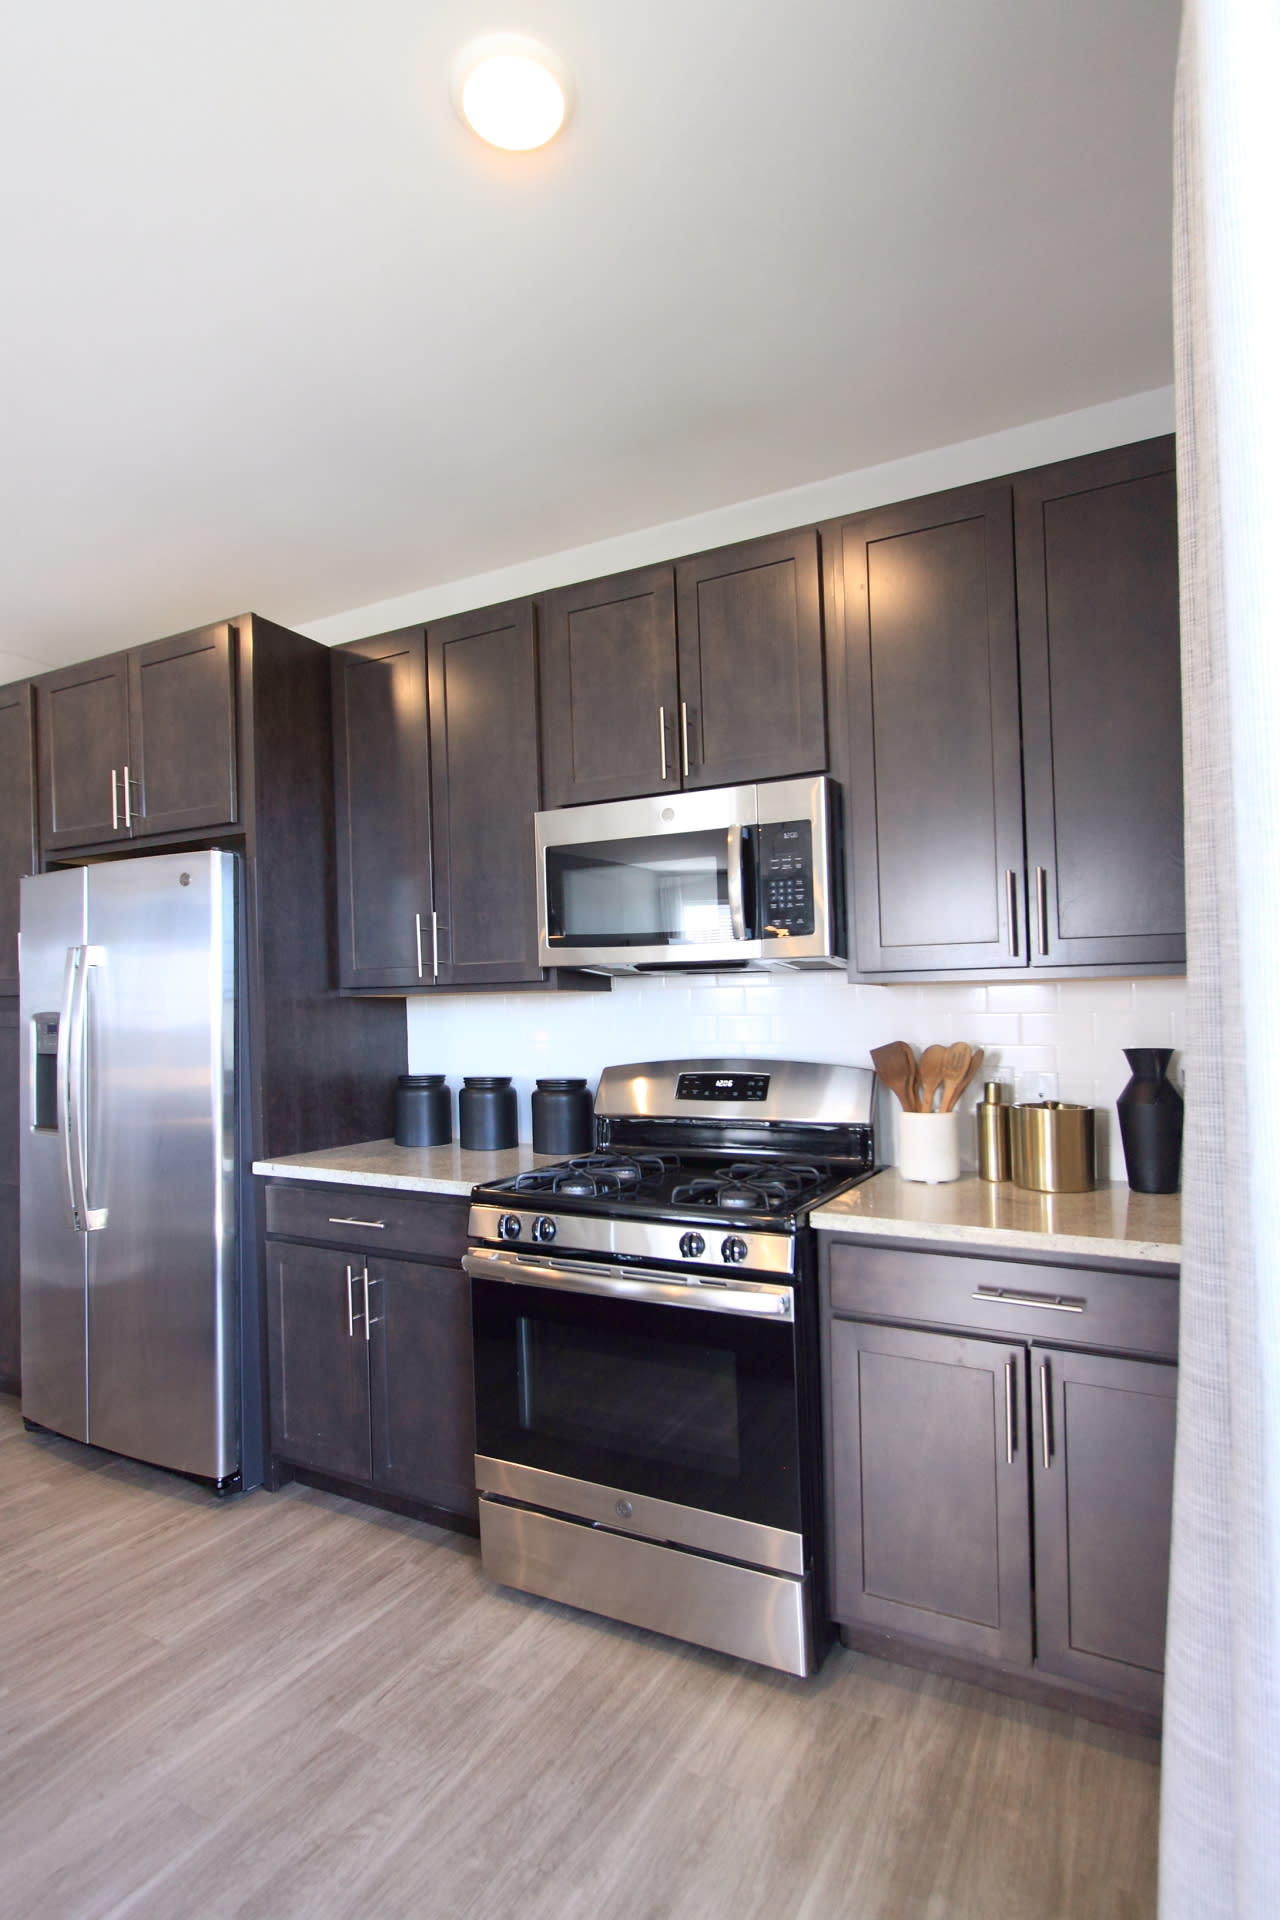 A kitchen with dark cabinets and stainless steel appliances